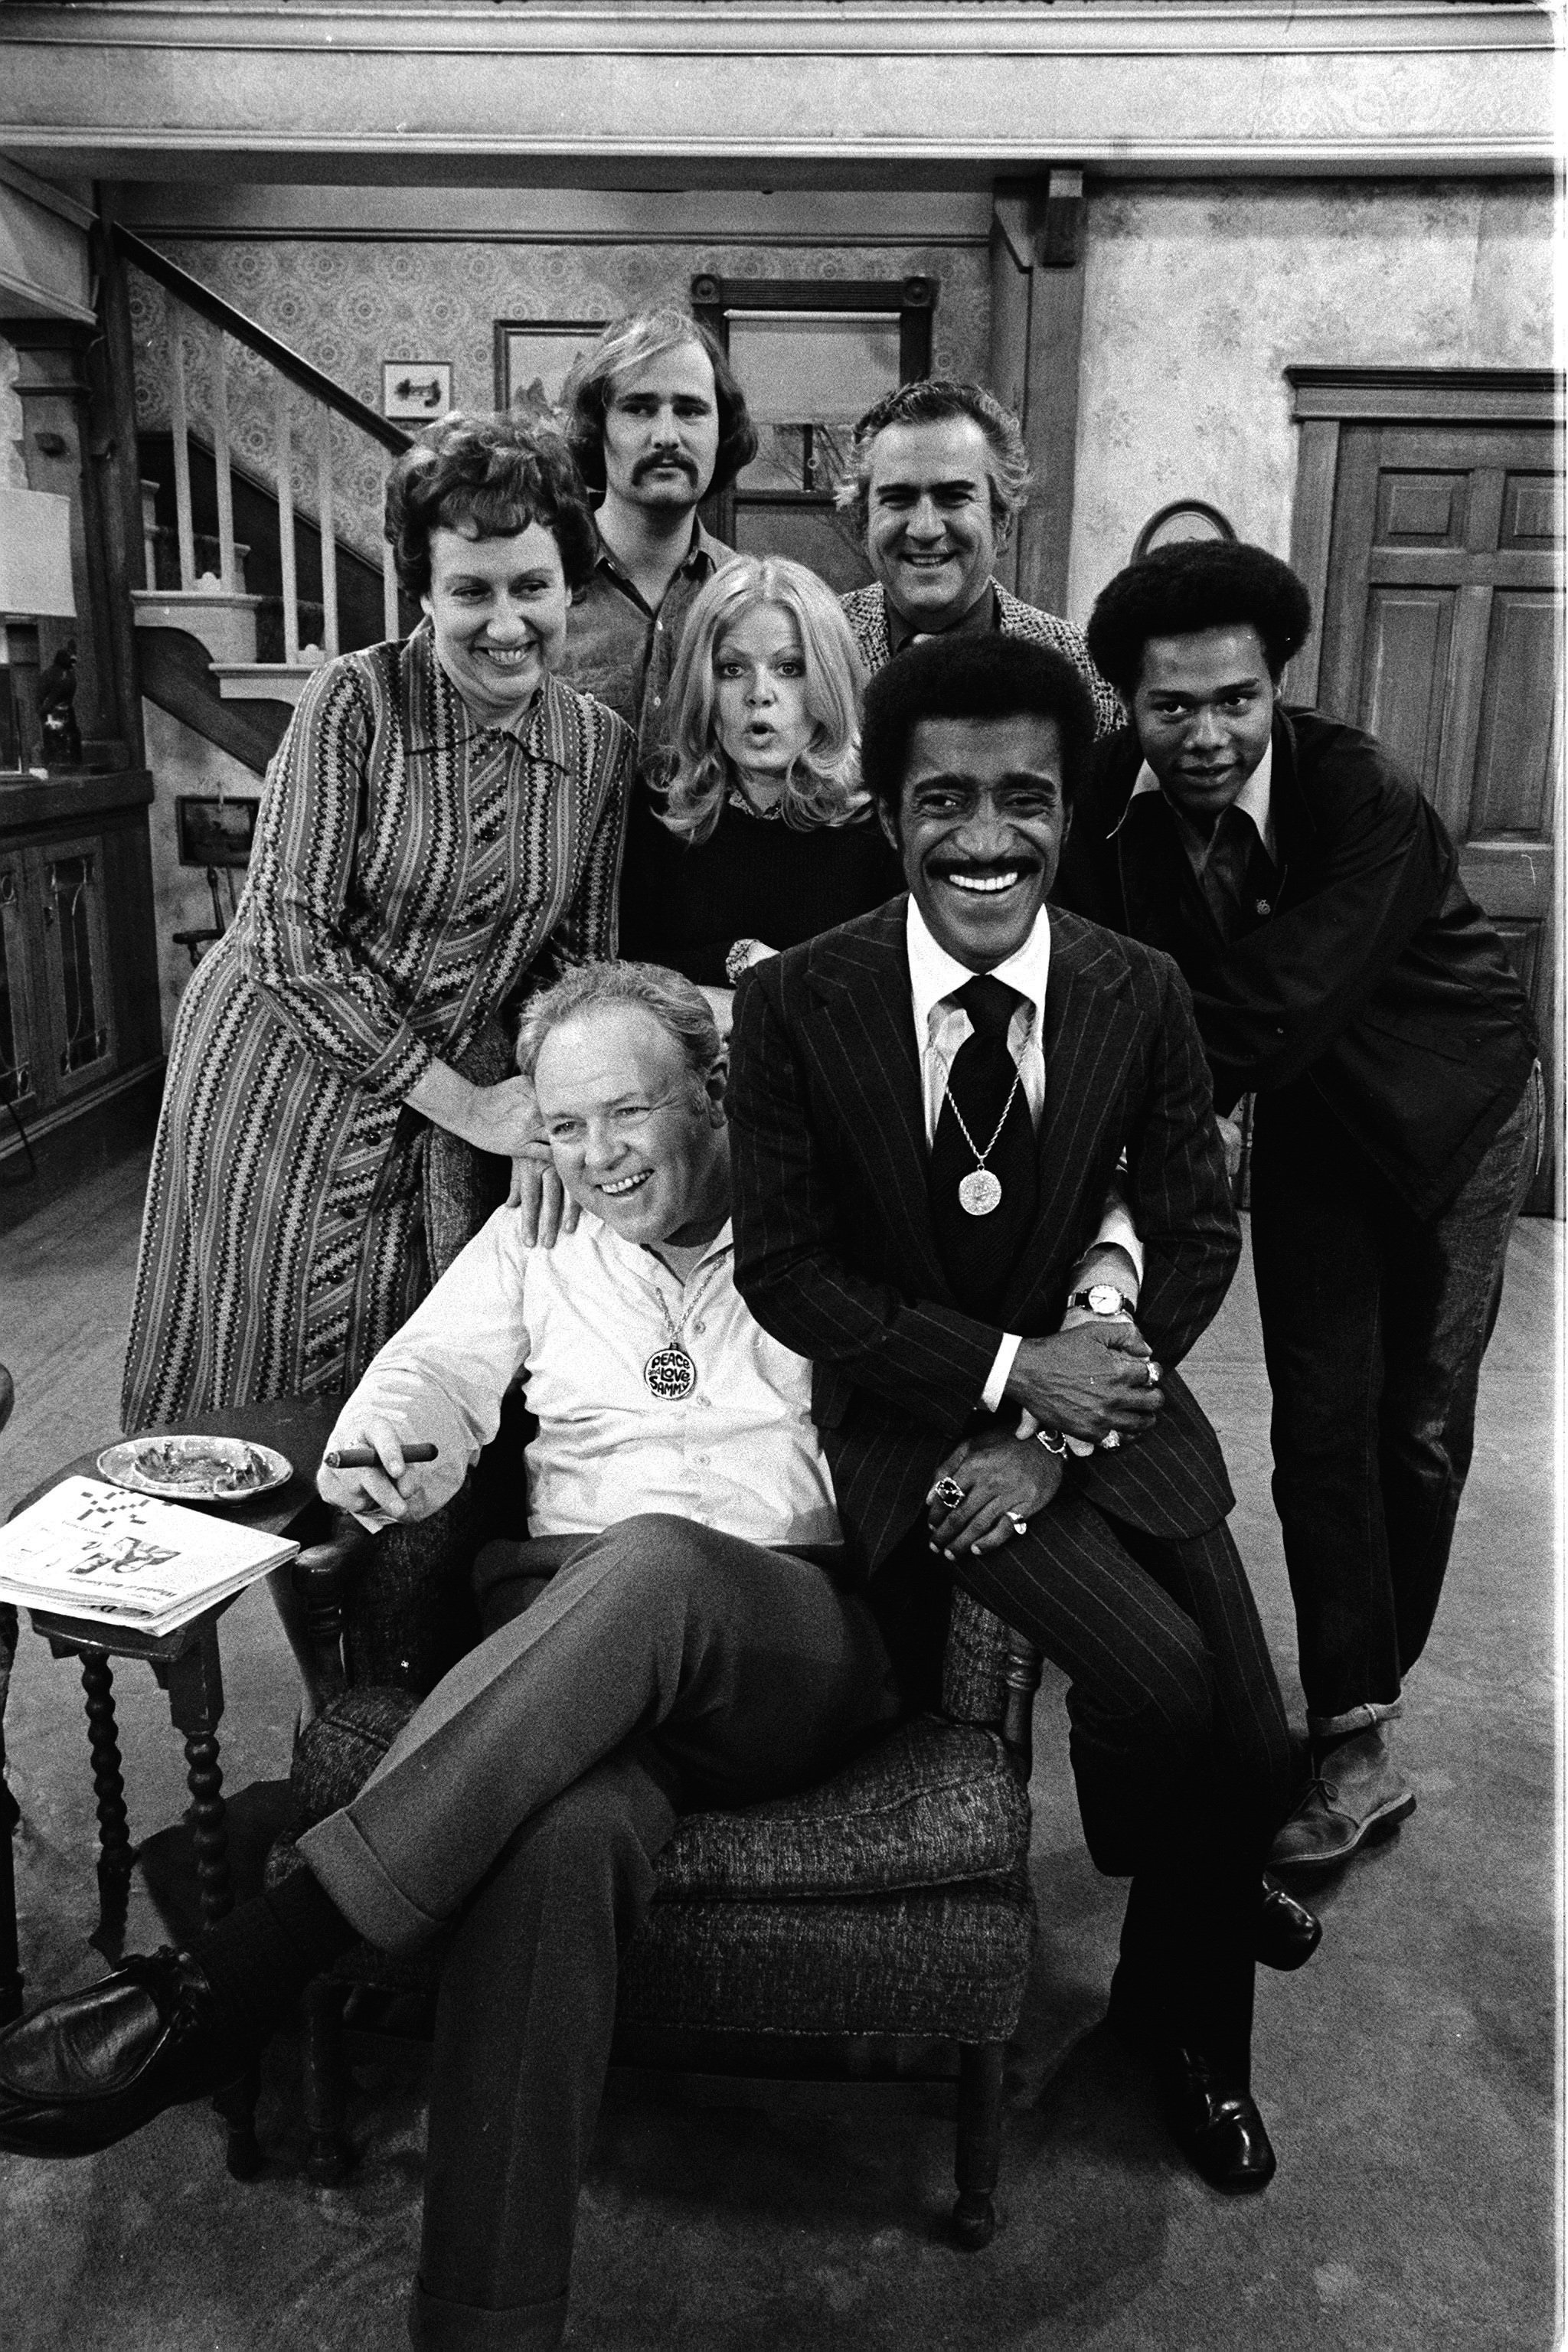 Sammy Davis Jr. (1925 - 1990) (front left) appears with actors Carroll O'Connor (1924 - 2001) (center), (standing left to right) Jean Stapleton, Rob Reiner, Sally Struthers, Billy Halop (1`920 - 1976), and Mike Evans on the set of the CBS series 'All in the Family' during an episode entitled 'Sammy's Visit,' January 25, 1972 (the epsiode first aired on February 19th) | Source: Getty Images 